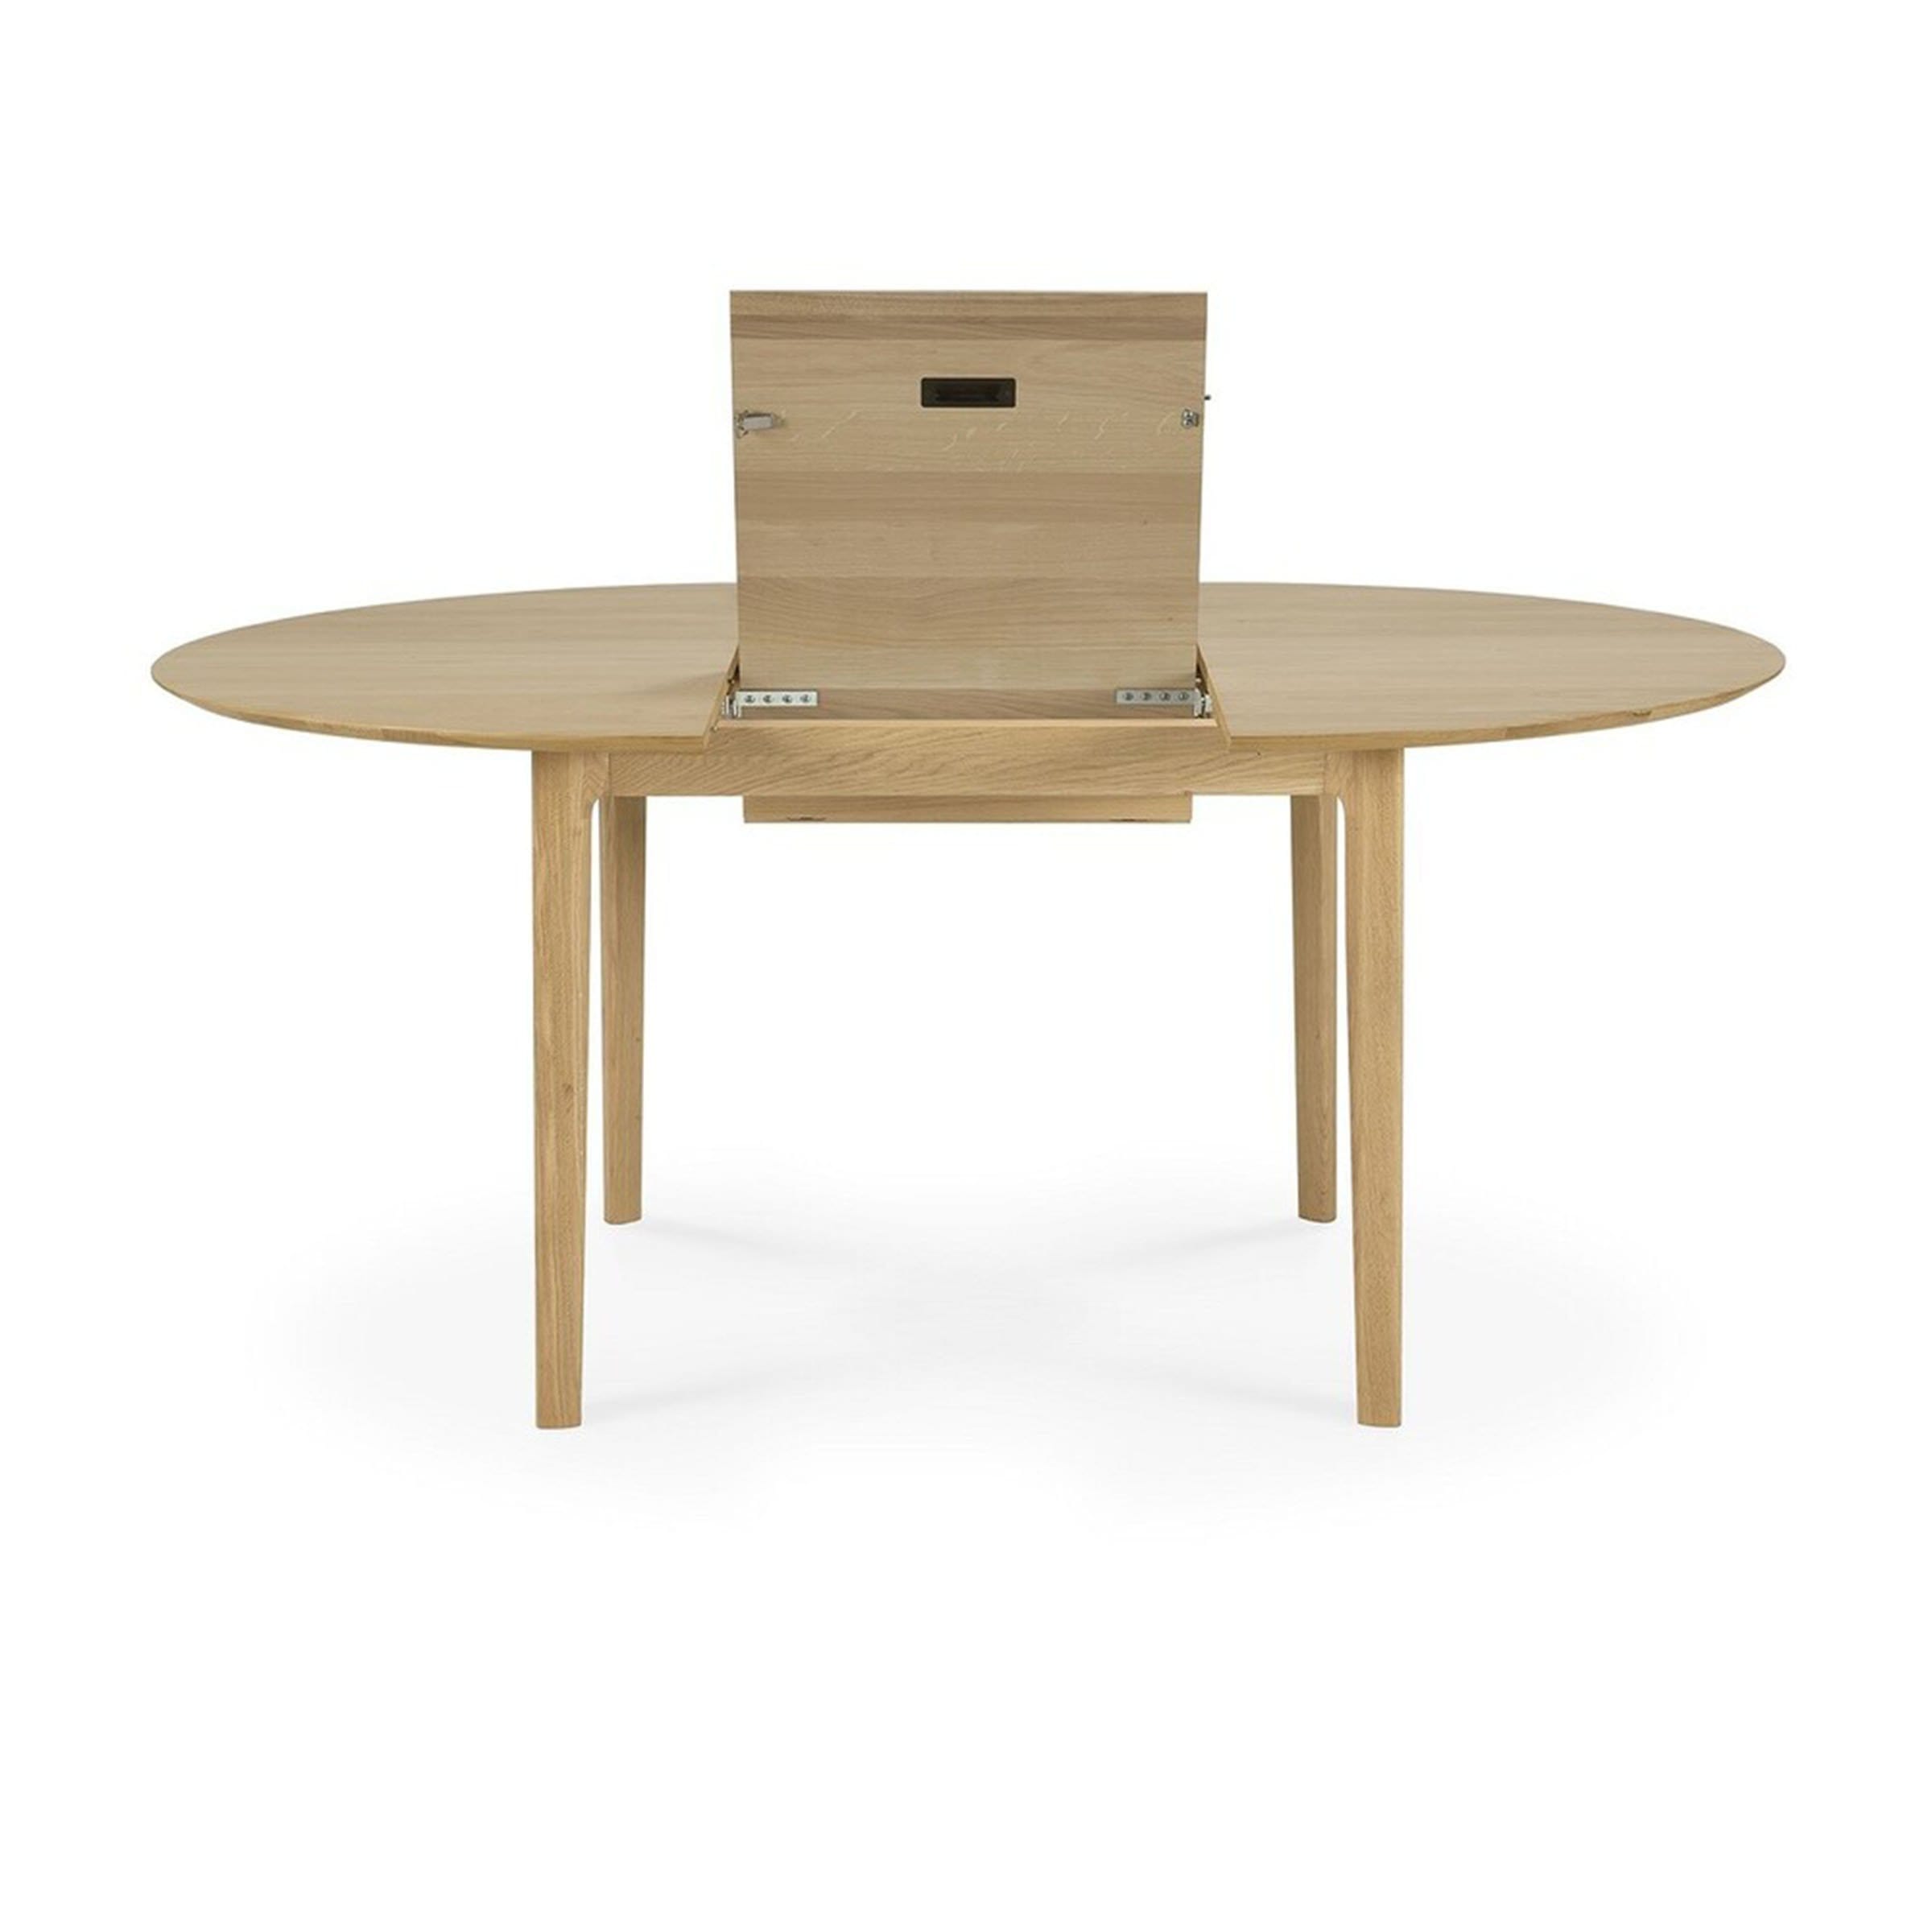 120cm Round Dining Table: How Many Seats Fit Just Right? – Meubilair